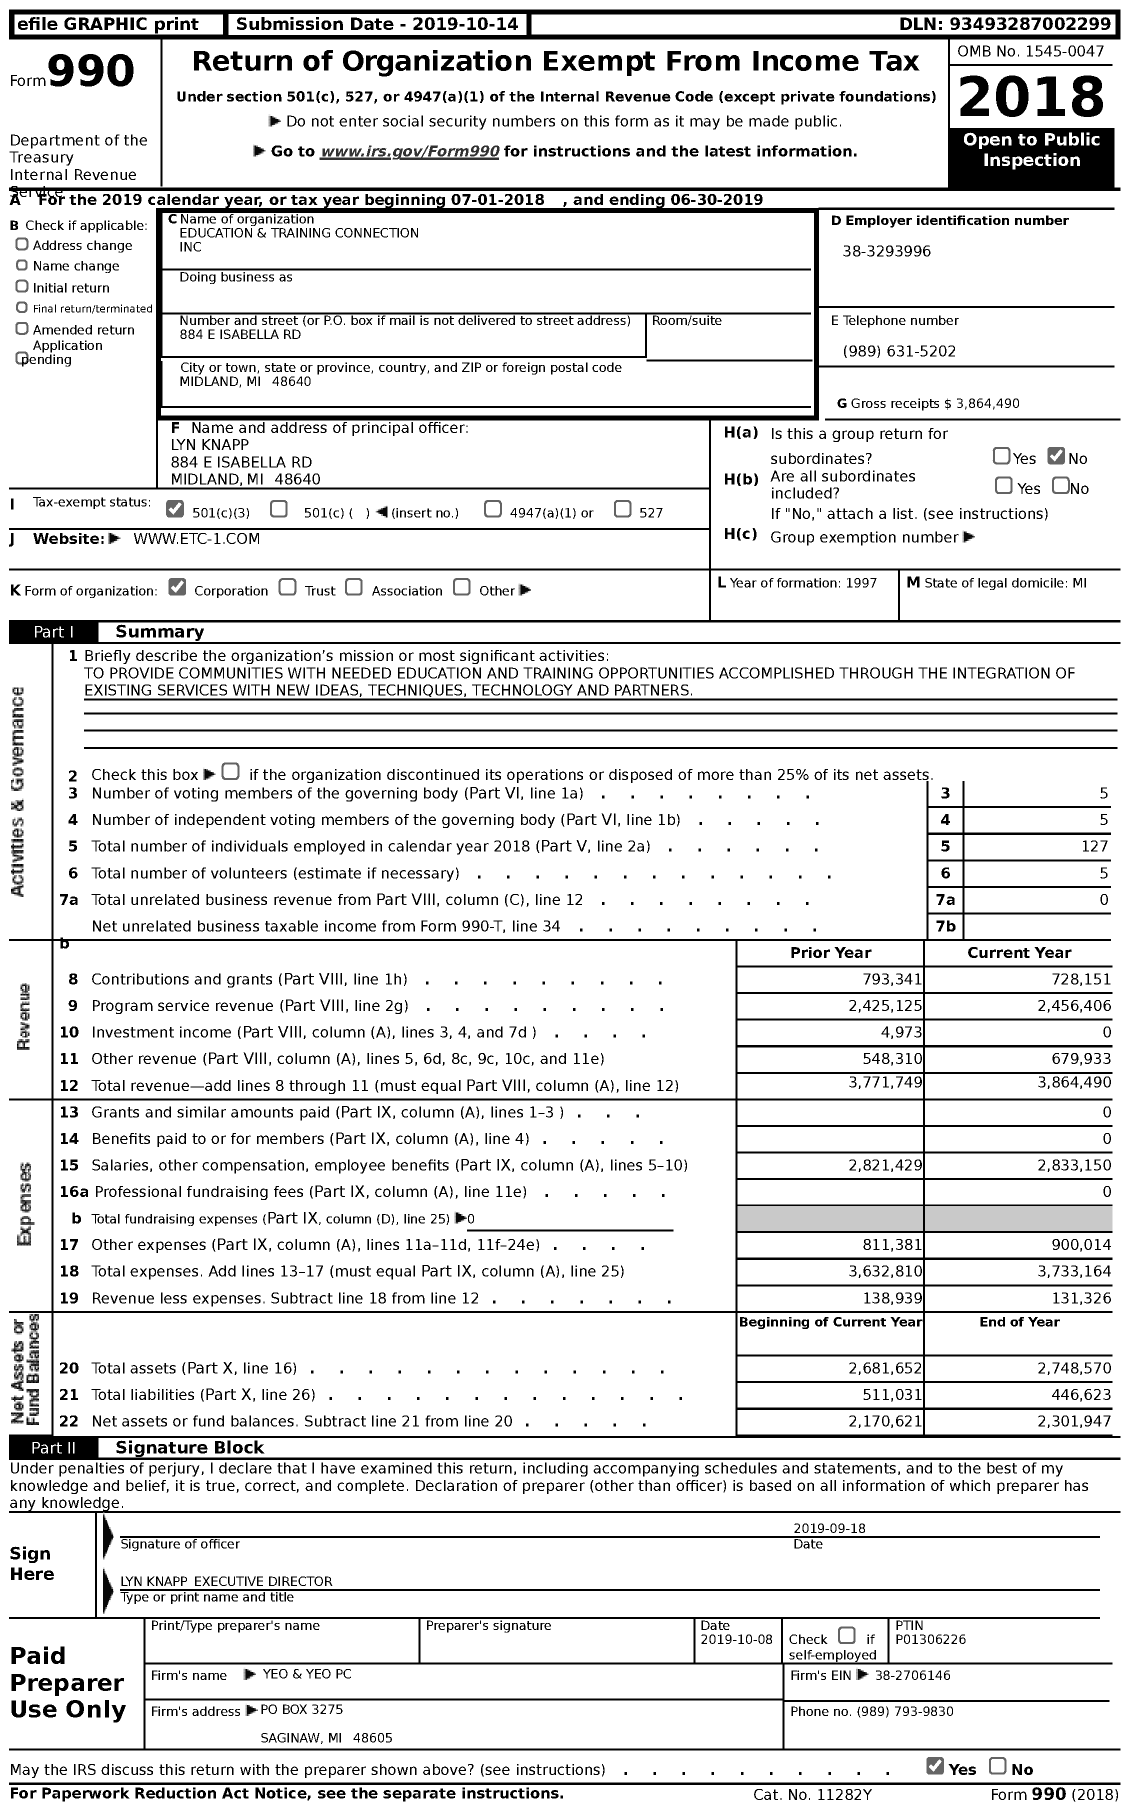 Image of first page of 2018 Form 990 for Education and Training Connection